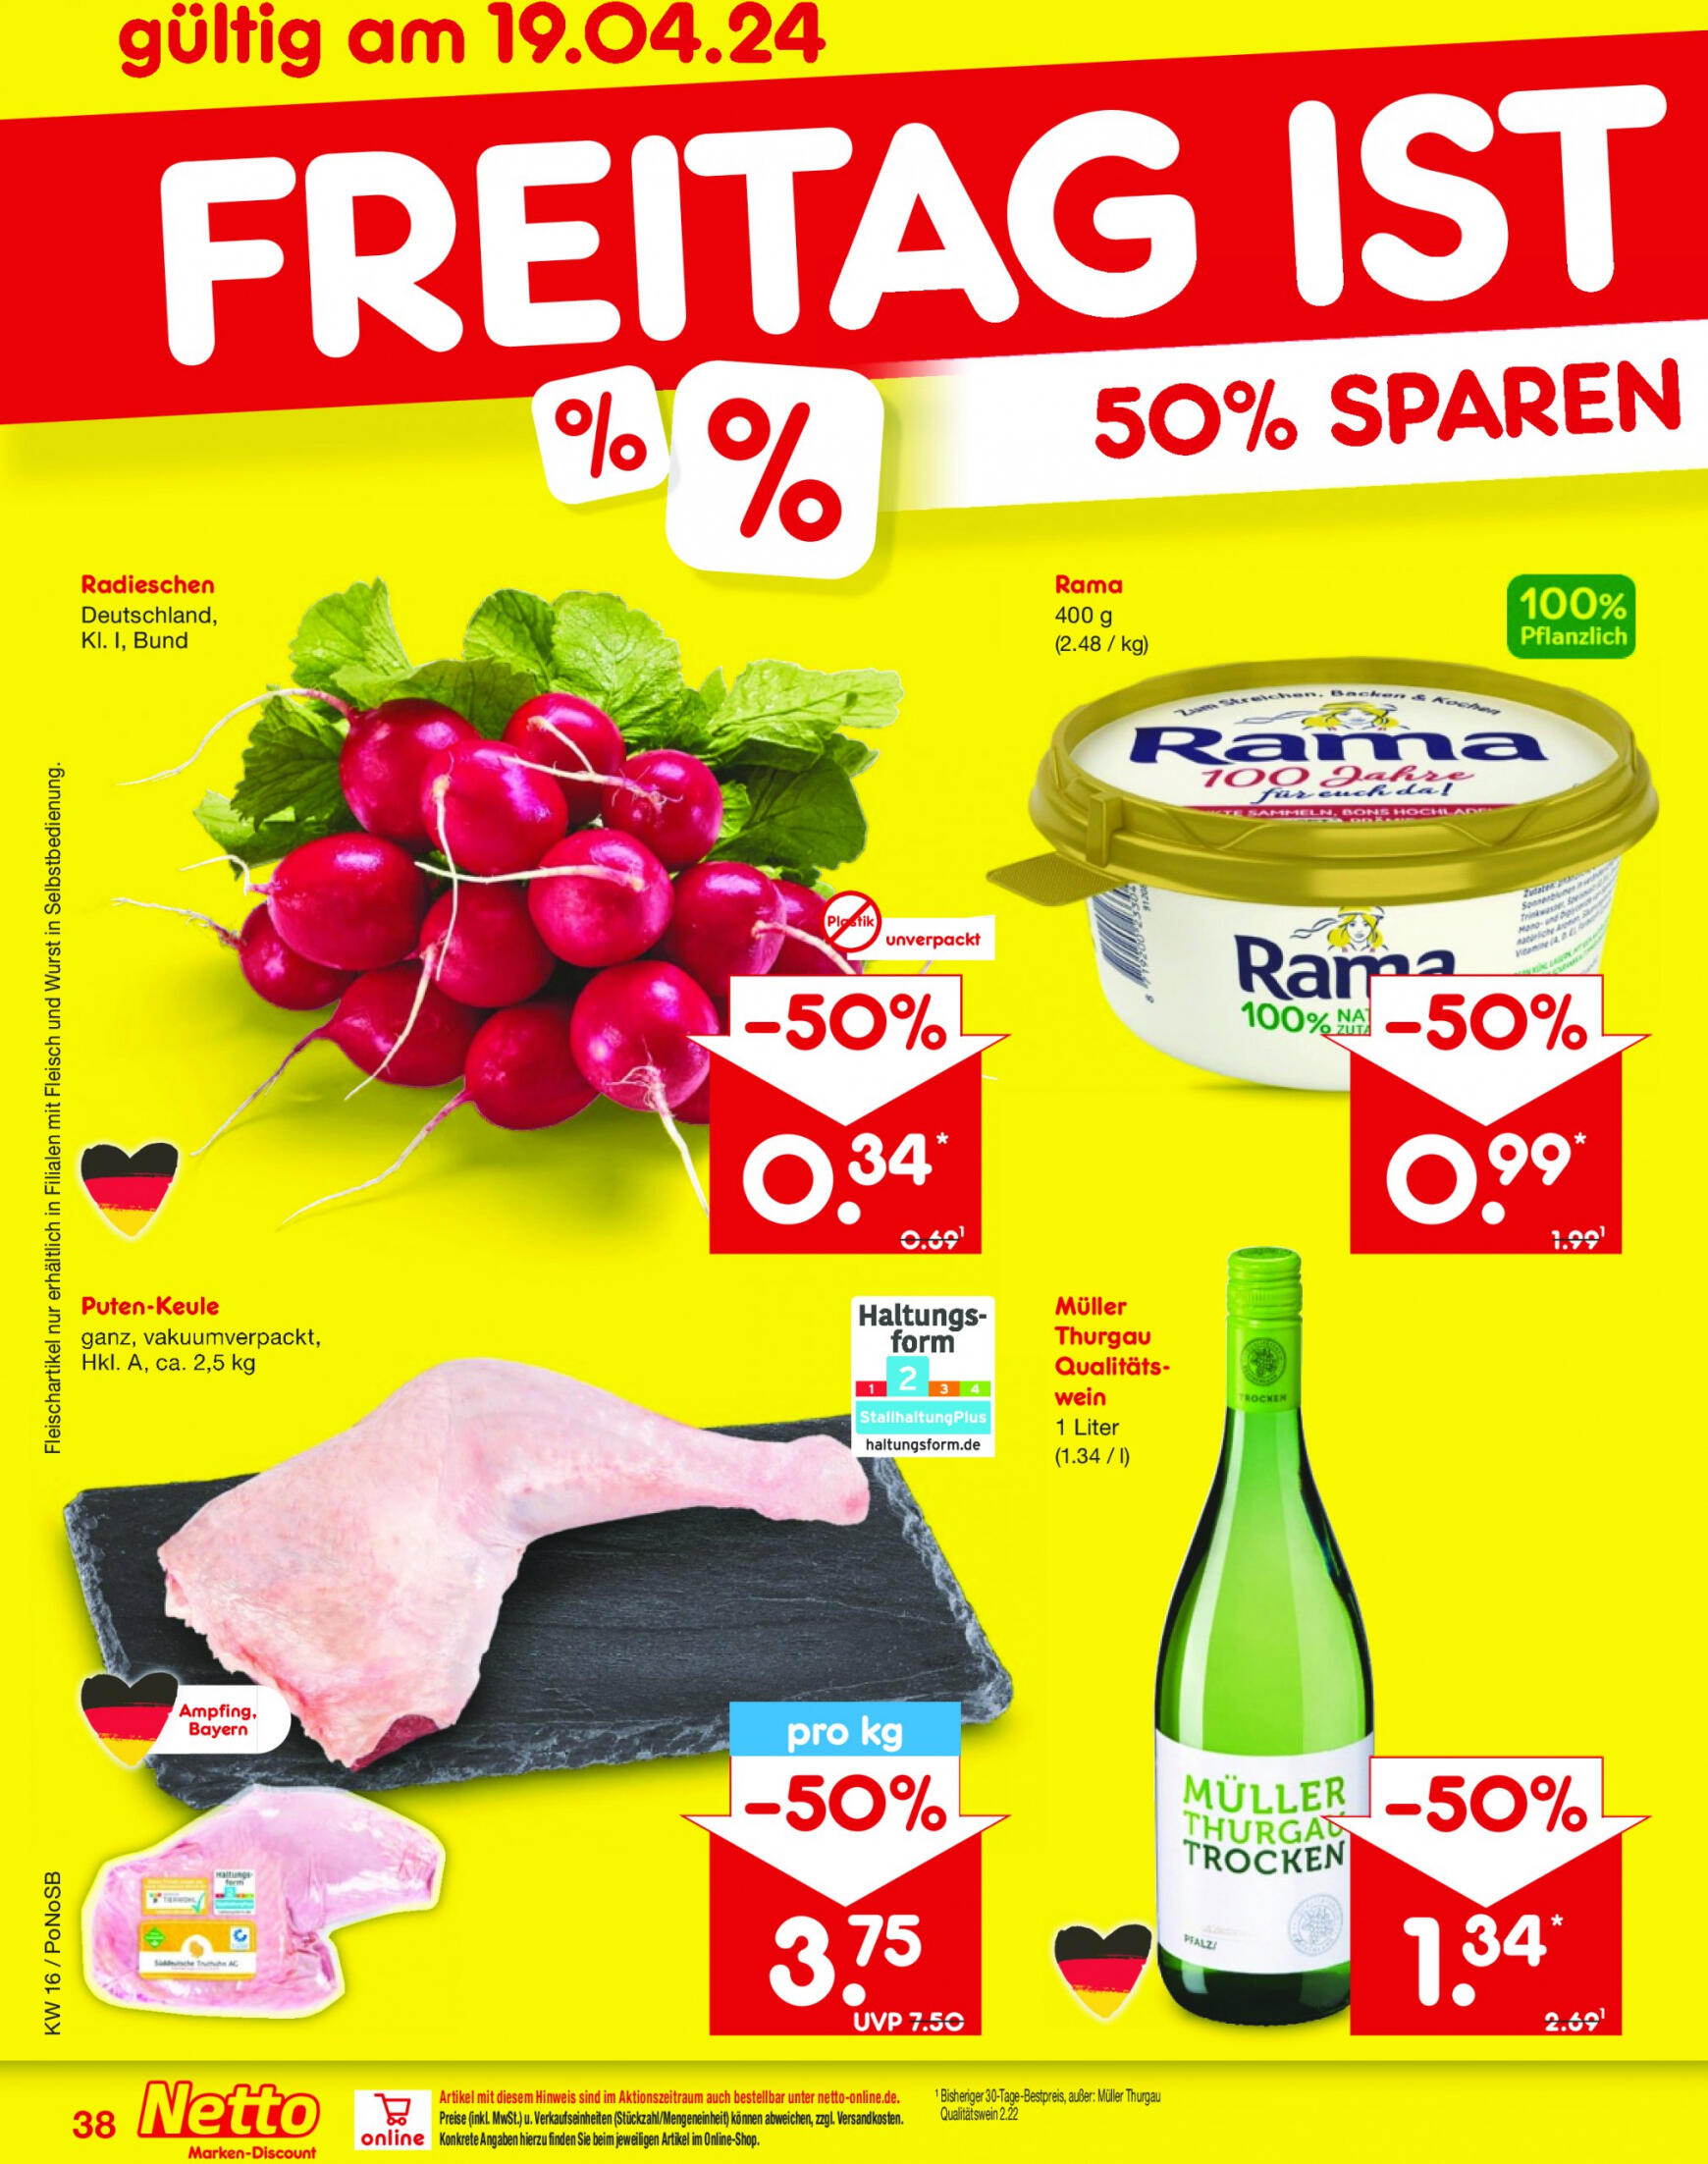 netto - Flyer Netto aktuell 15.04. - 20.04. - page: 44